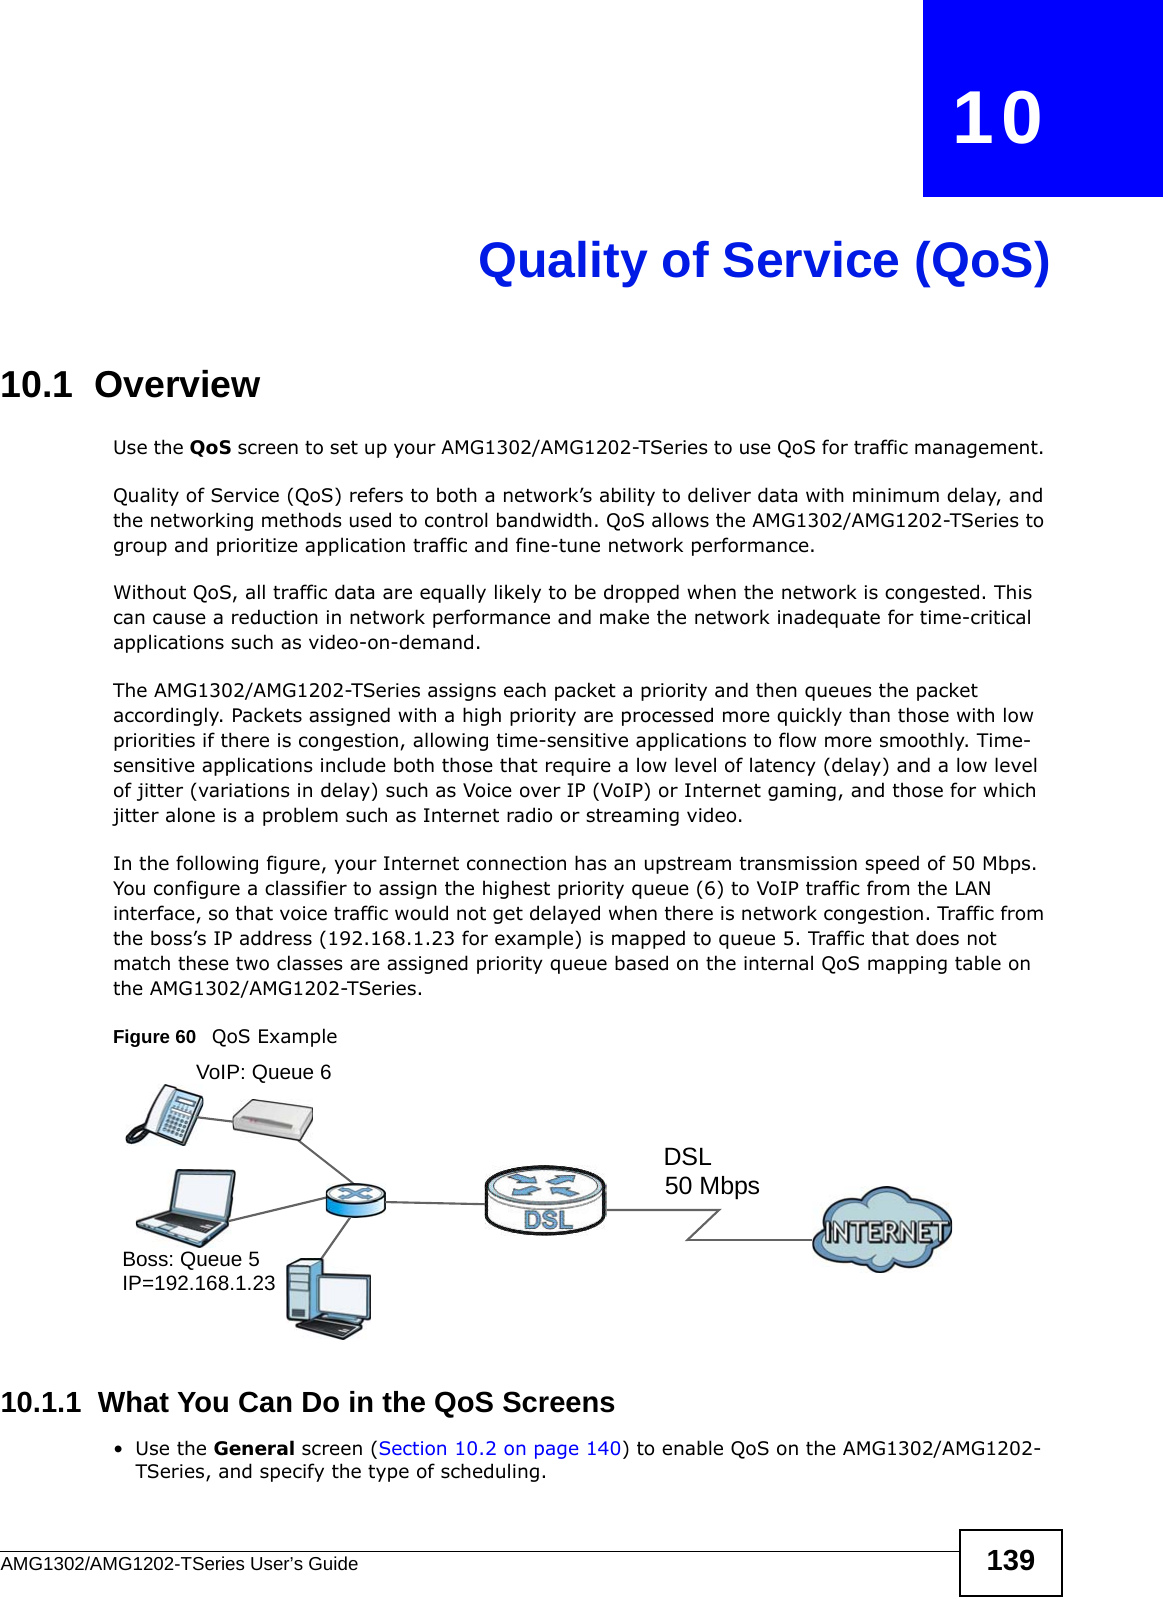 AMG1302/AMG1202-TSeries User’s Guide 139CHAPTER   10Quality of Service (QoS)10.1  OverviewUse the QoS screen to set up your AMG1302/AMG1202-TSeries to use QoS for traffic management. Quality of Service (QoS) refers to both a network’s ability to deliver data with minimum delay, and the networking methods used to control bandwidth. QoS allows the AMG1302/AMG1202-TSeries to group and prioritize application traffic and fine-tune network performance. Without QoS, all traffic data are equally likely to be dropped when the network is congested. This can cause a reduction in network performance and make the network inadequate for time-critical applications such as video-on-demand.The AMG1302/AMG1202-TSeries assigns each packet a priority and then queues the packet accordingly. Packets assigned with a high priority are processed more quickly than those with low priorities if there is congestion, allowing time-sensitive applications to flow more smoothly. Time-sensitive applications include both those that require a low level of latency (delay) and a low level of jitter (variations in delay) such as Voice over IP (VoIP) or Internet gaming, and those for which jitter alone is a problem such as Internet radio or streaming video.In the following figure, your Internet connection has an upstream transmission speed of 50 Mbps. You configure a classifier to assign the highest priority queue (6) to VoIP traffic from the LAN interface, so that voice traffic would not get delayed when there is network congestion. Traffic from the boss’s IP address (192.168.1.23 for example) is mapped to queue 5. Traffic that does not match these two classes are assigned priority queue based on the internal QoS mapping table on the AMG1302/AMG1202-TSeries.Figure 60   QoS Example10.1.1  What You Can Do in the QoS Screens•Use the General screen (Section 10.2 on page 140) to enable QoS on the AMG1302/AMG1202-TSeries, and specify the type of scheduling.50 MbpsDSLVoIP: Queue 6Boss: Queue 5IP=192.168.1.23